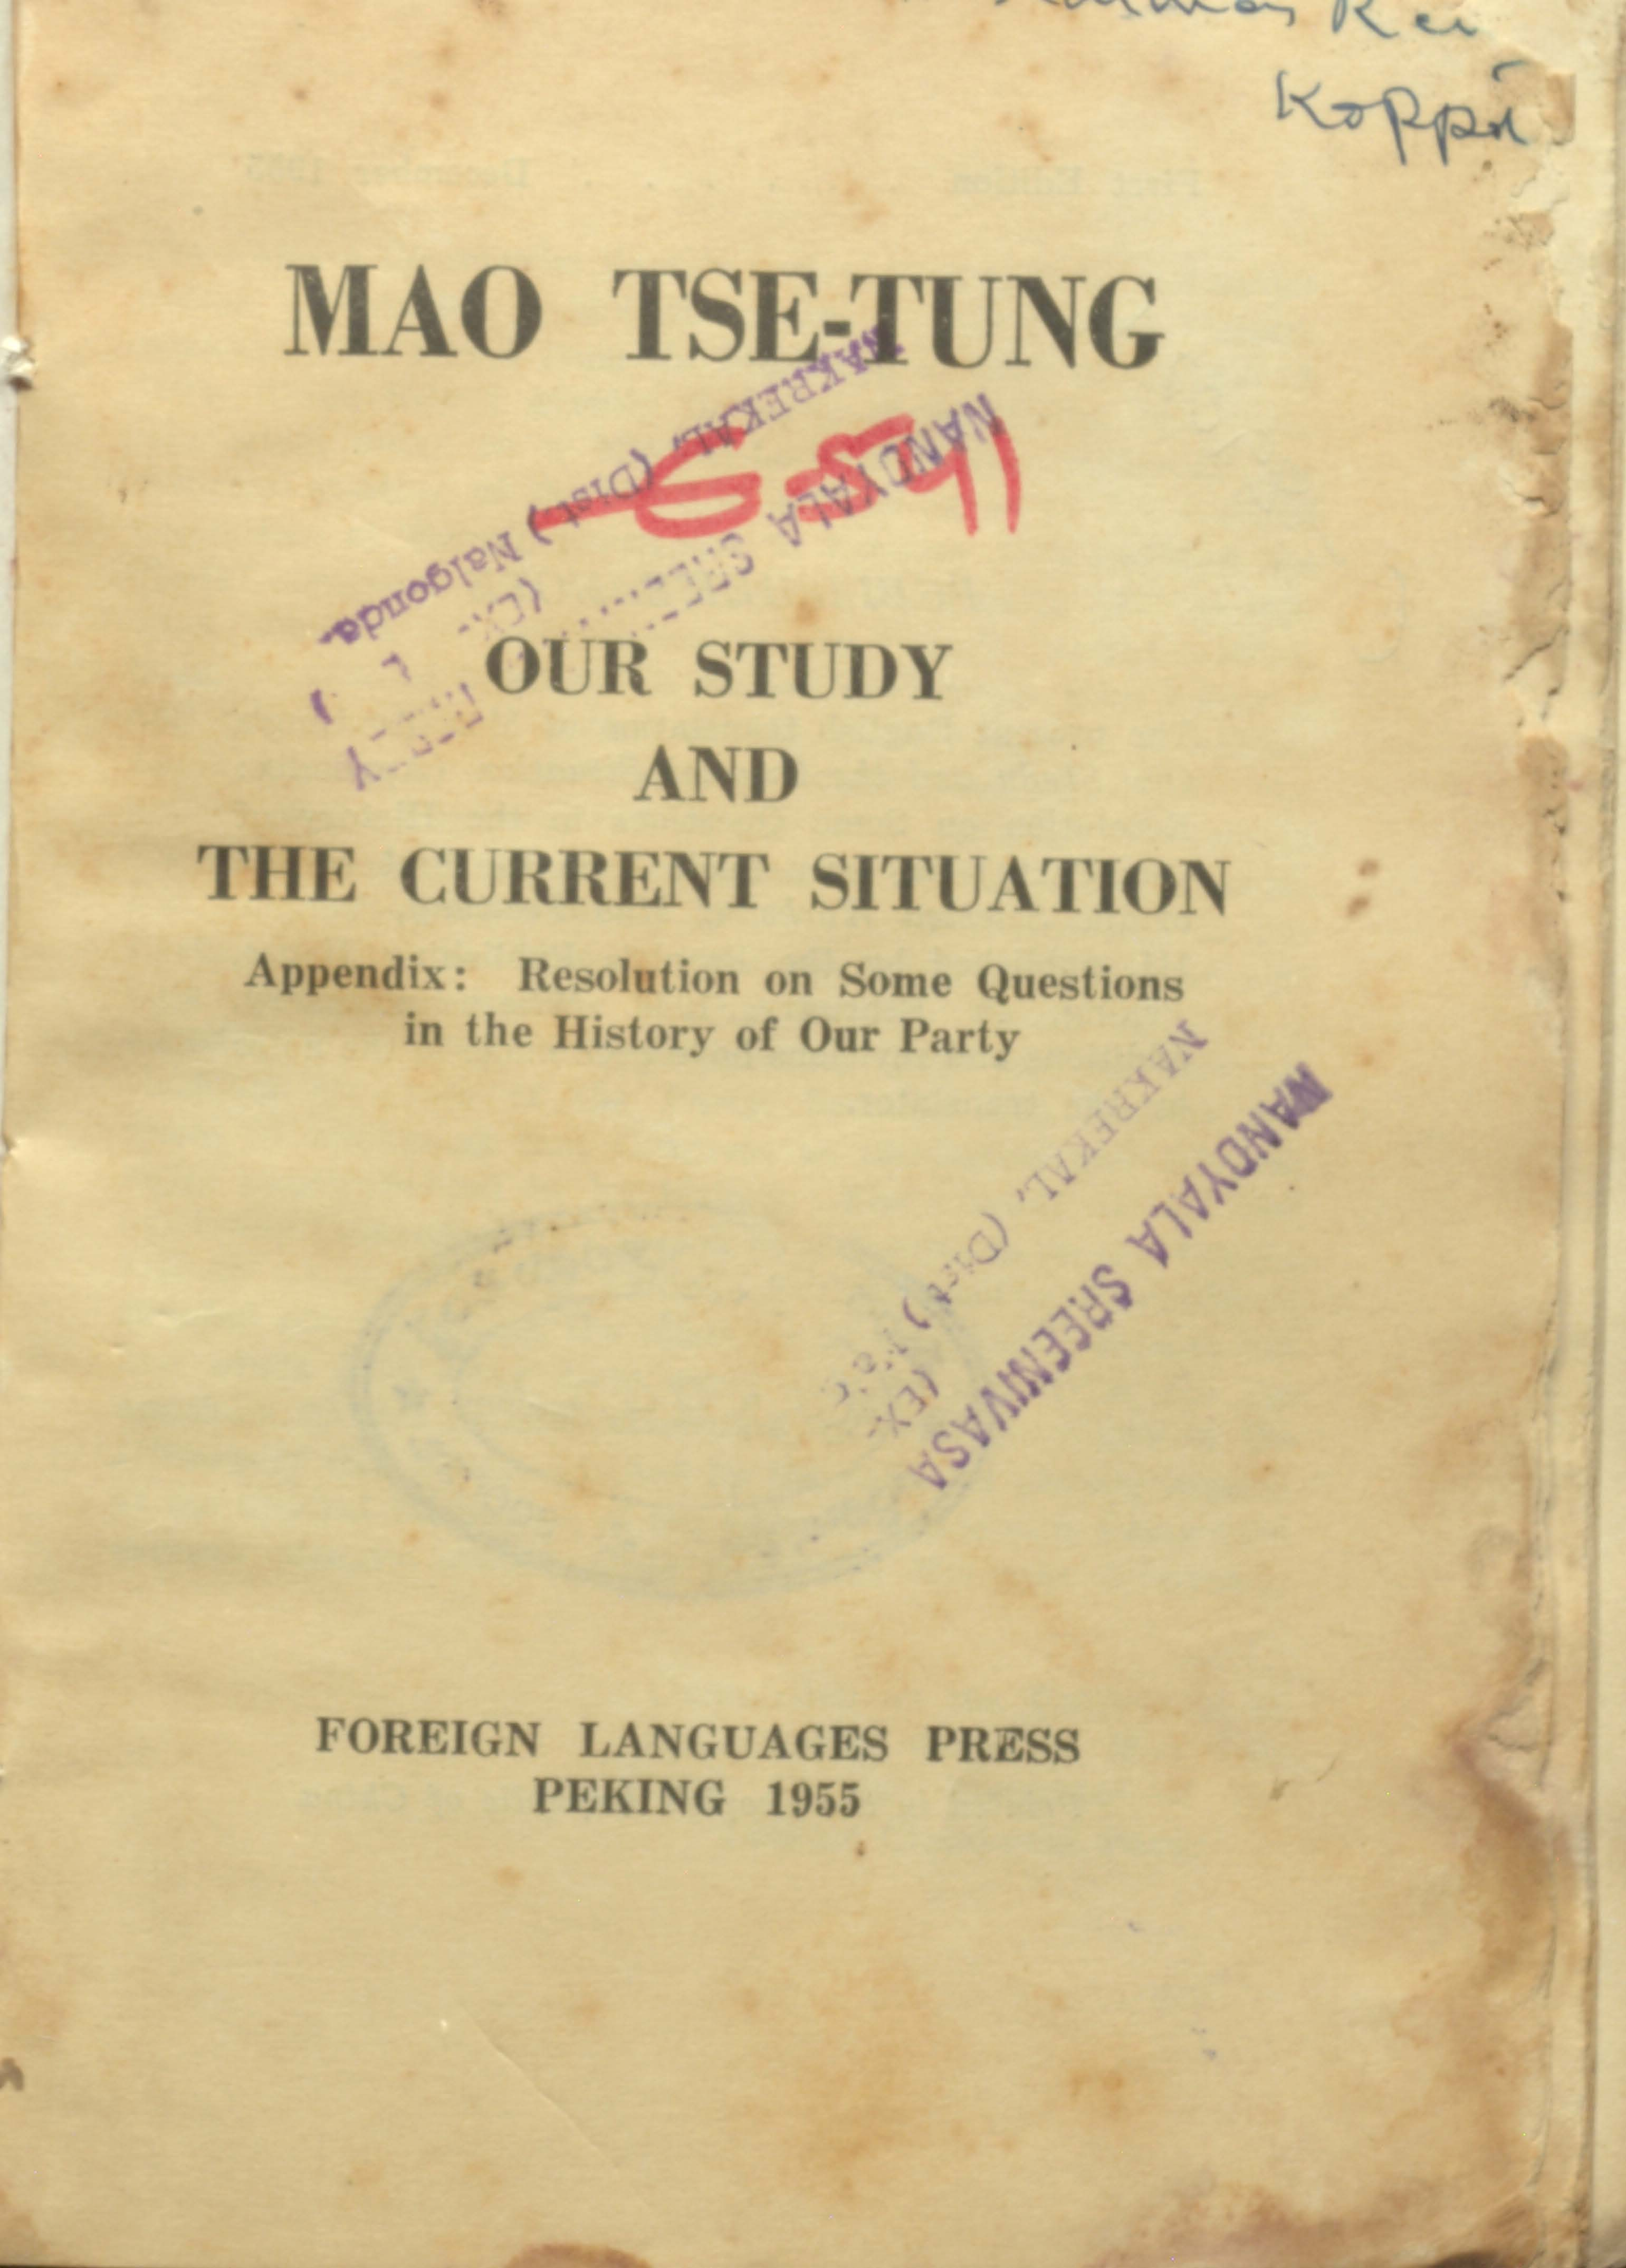 MAO TSE-TUNG our study and the current situation